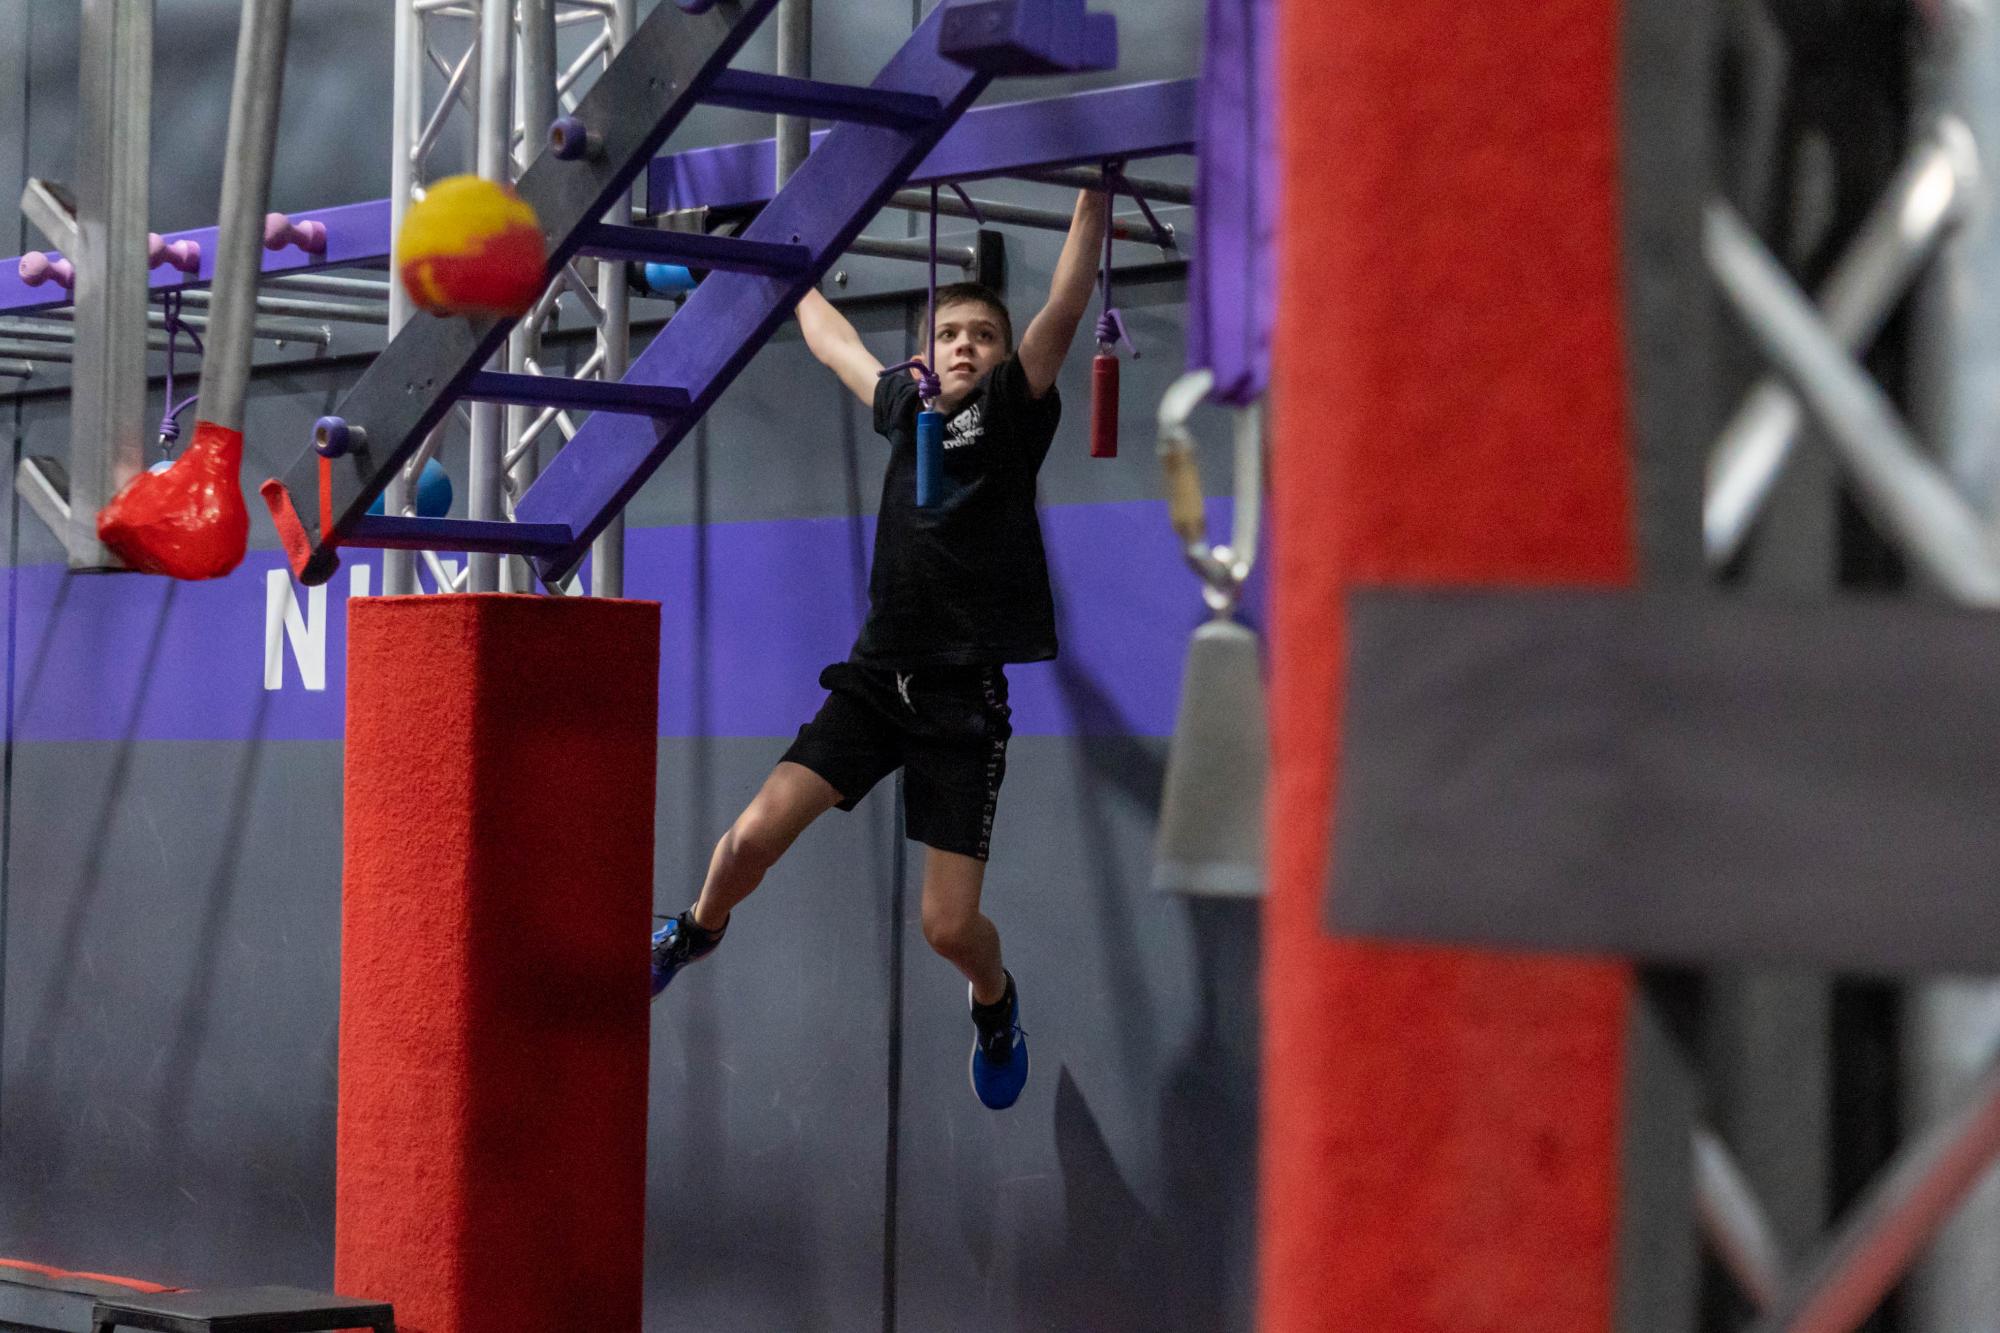 Events Australian Ninja Games Youth Qualifier All 438 at a Ninja Warrior gym in Melbourne, Australia.